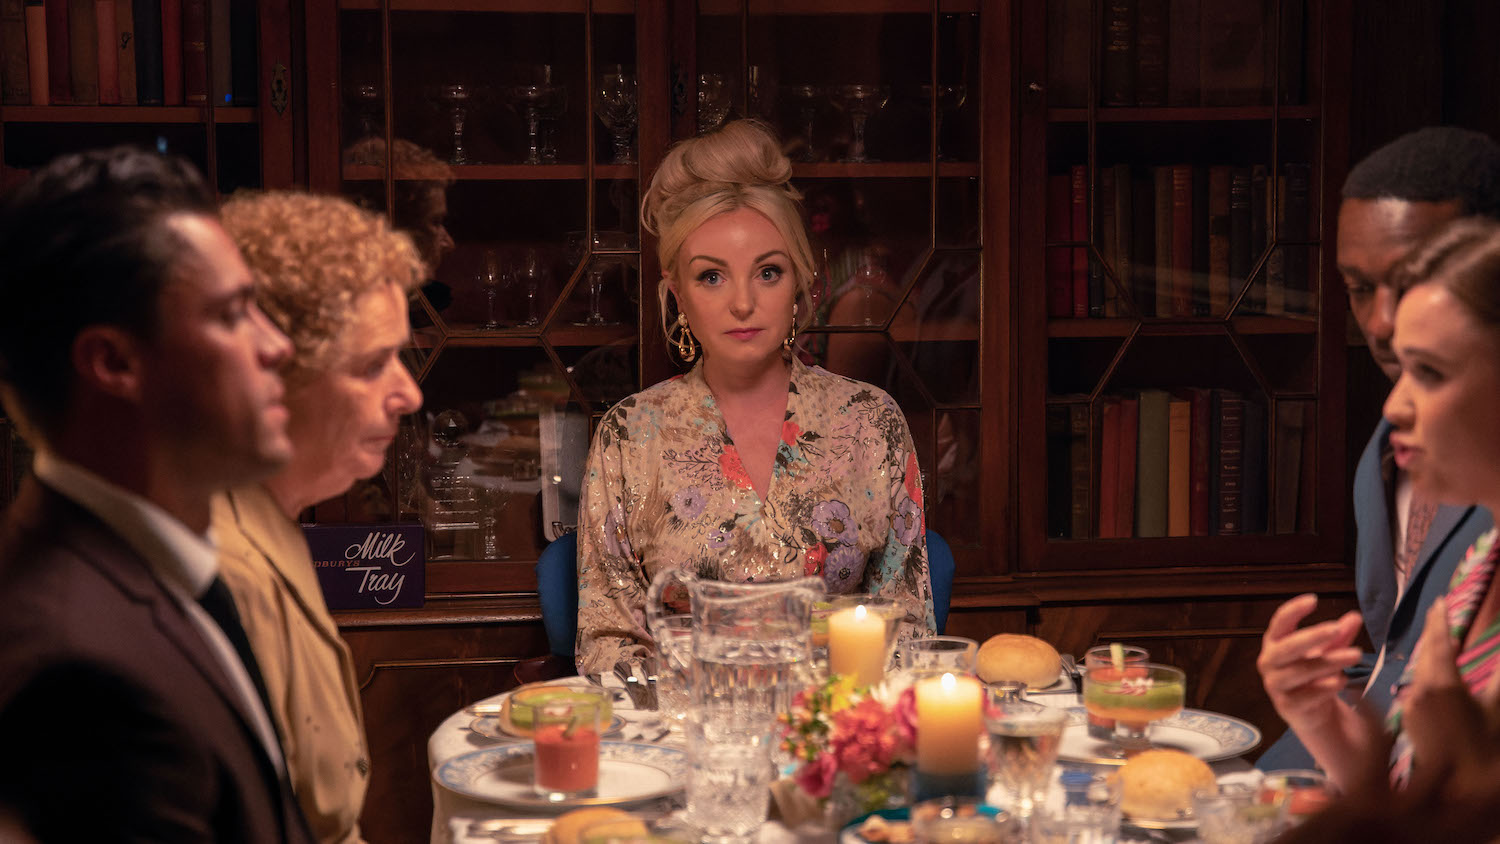 Picture shows: At her casual dinner party with friends, hostess Nurse Trixie (Helen George) at the head of the table, looks like a very glamorous deer caught by headlights. Her guests, fiancé Matthew Aylward (Olly Rix), Nurse Phyllis (Linda Bassett), Cyril Robinson (Zephryn Tate) and Nurse Nancy (Megan Cusack), are talking but avoiding the food.